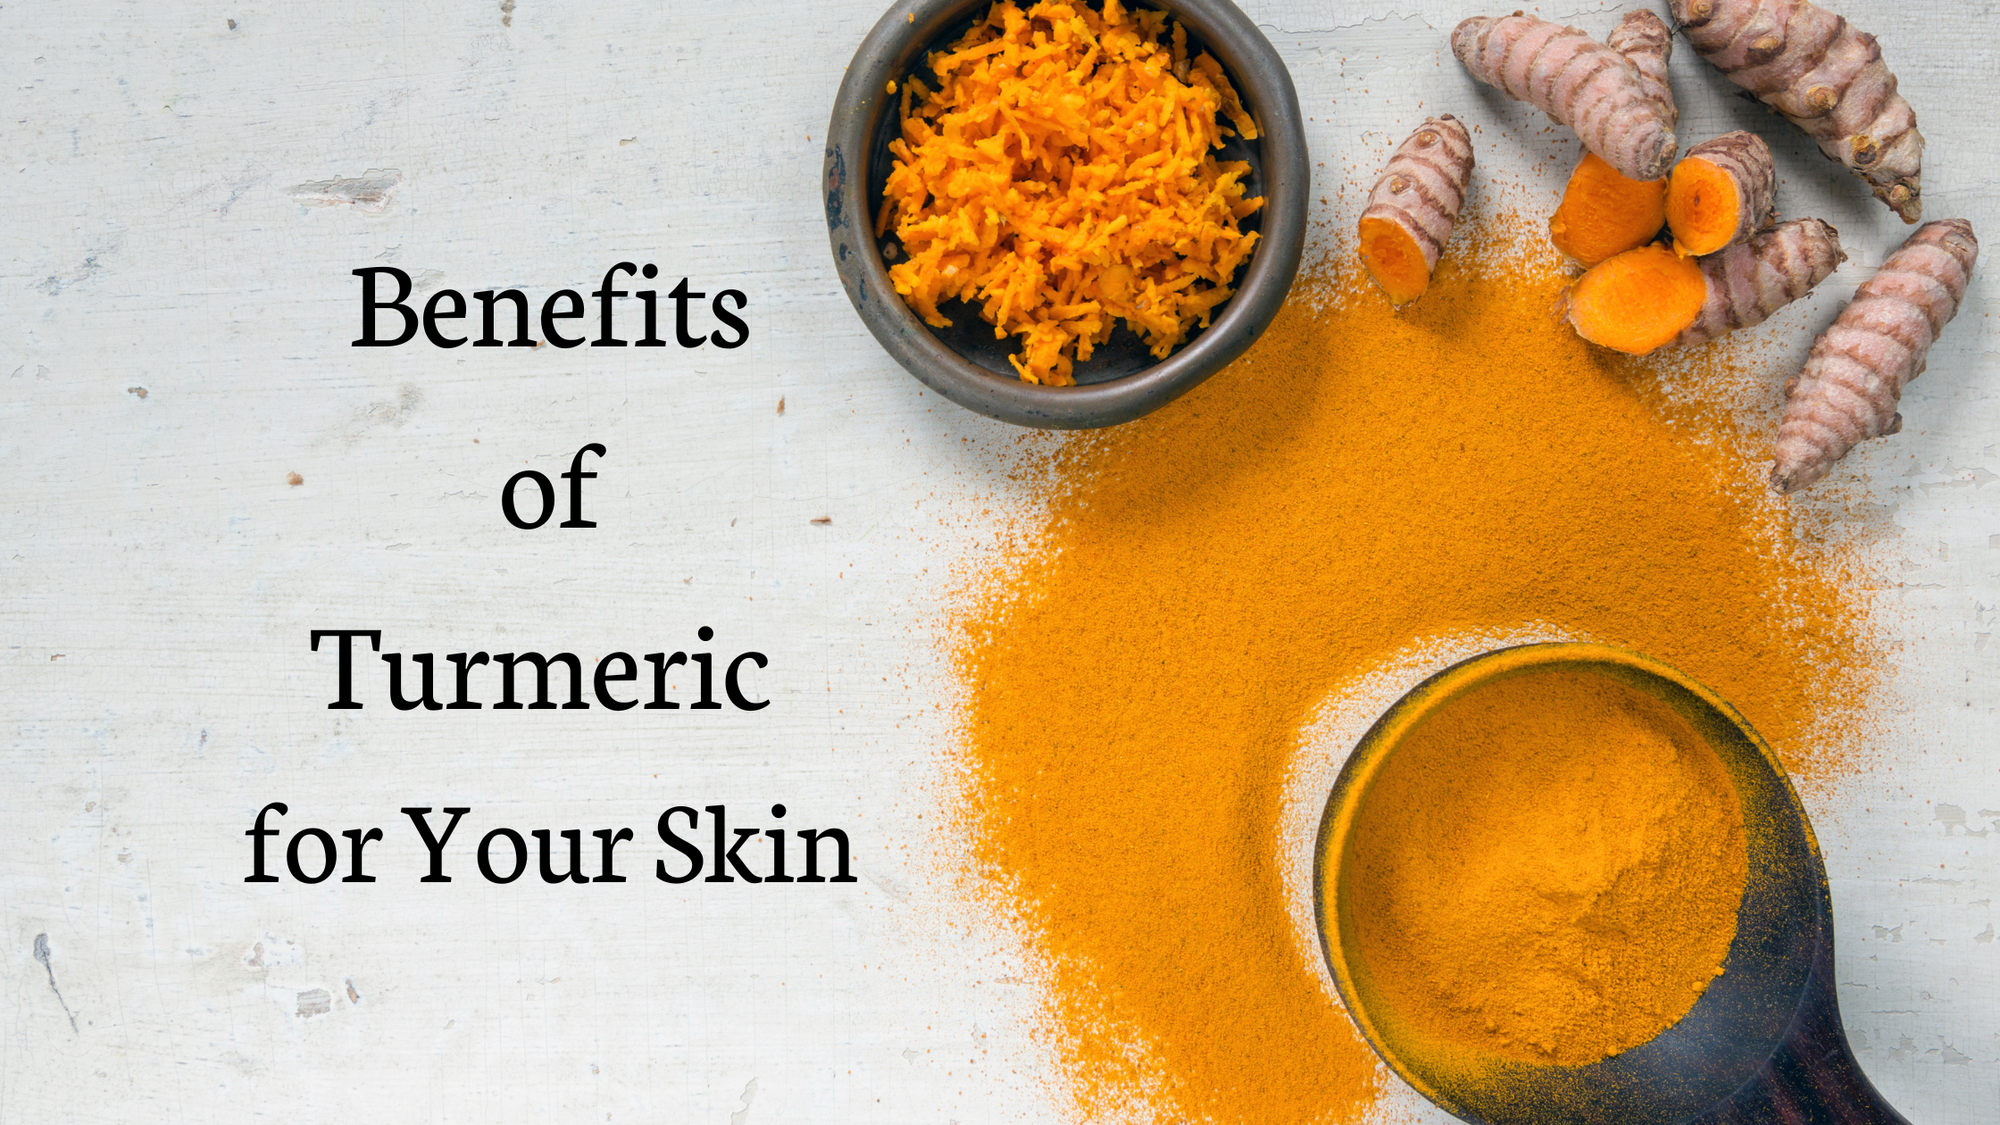 The Benefits of Turmeric for Your Skin